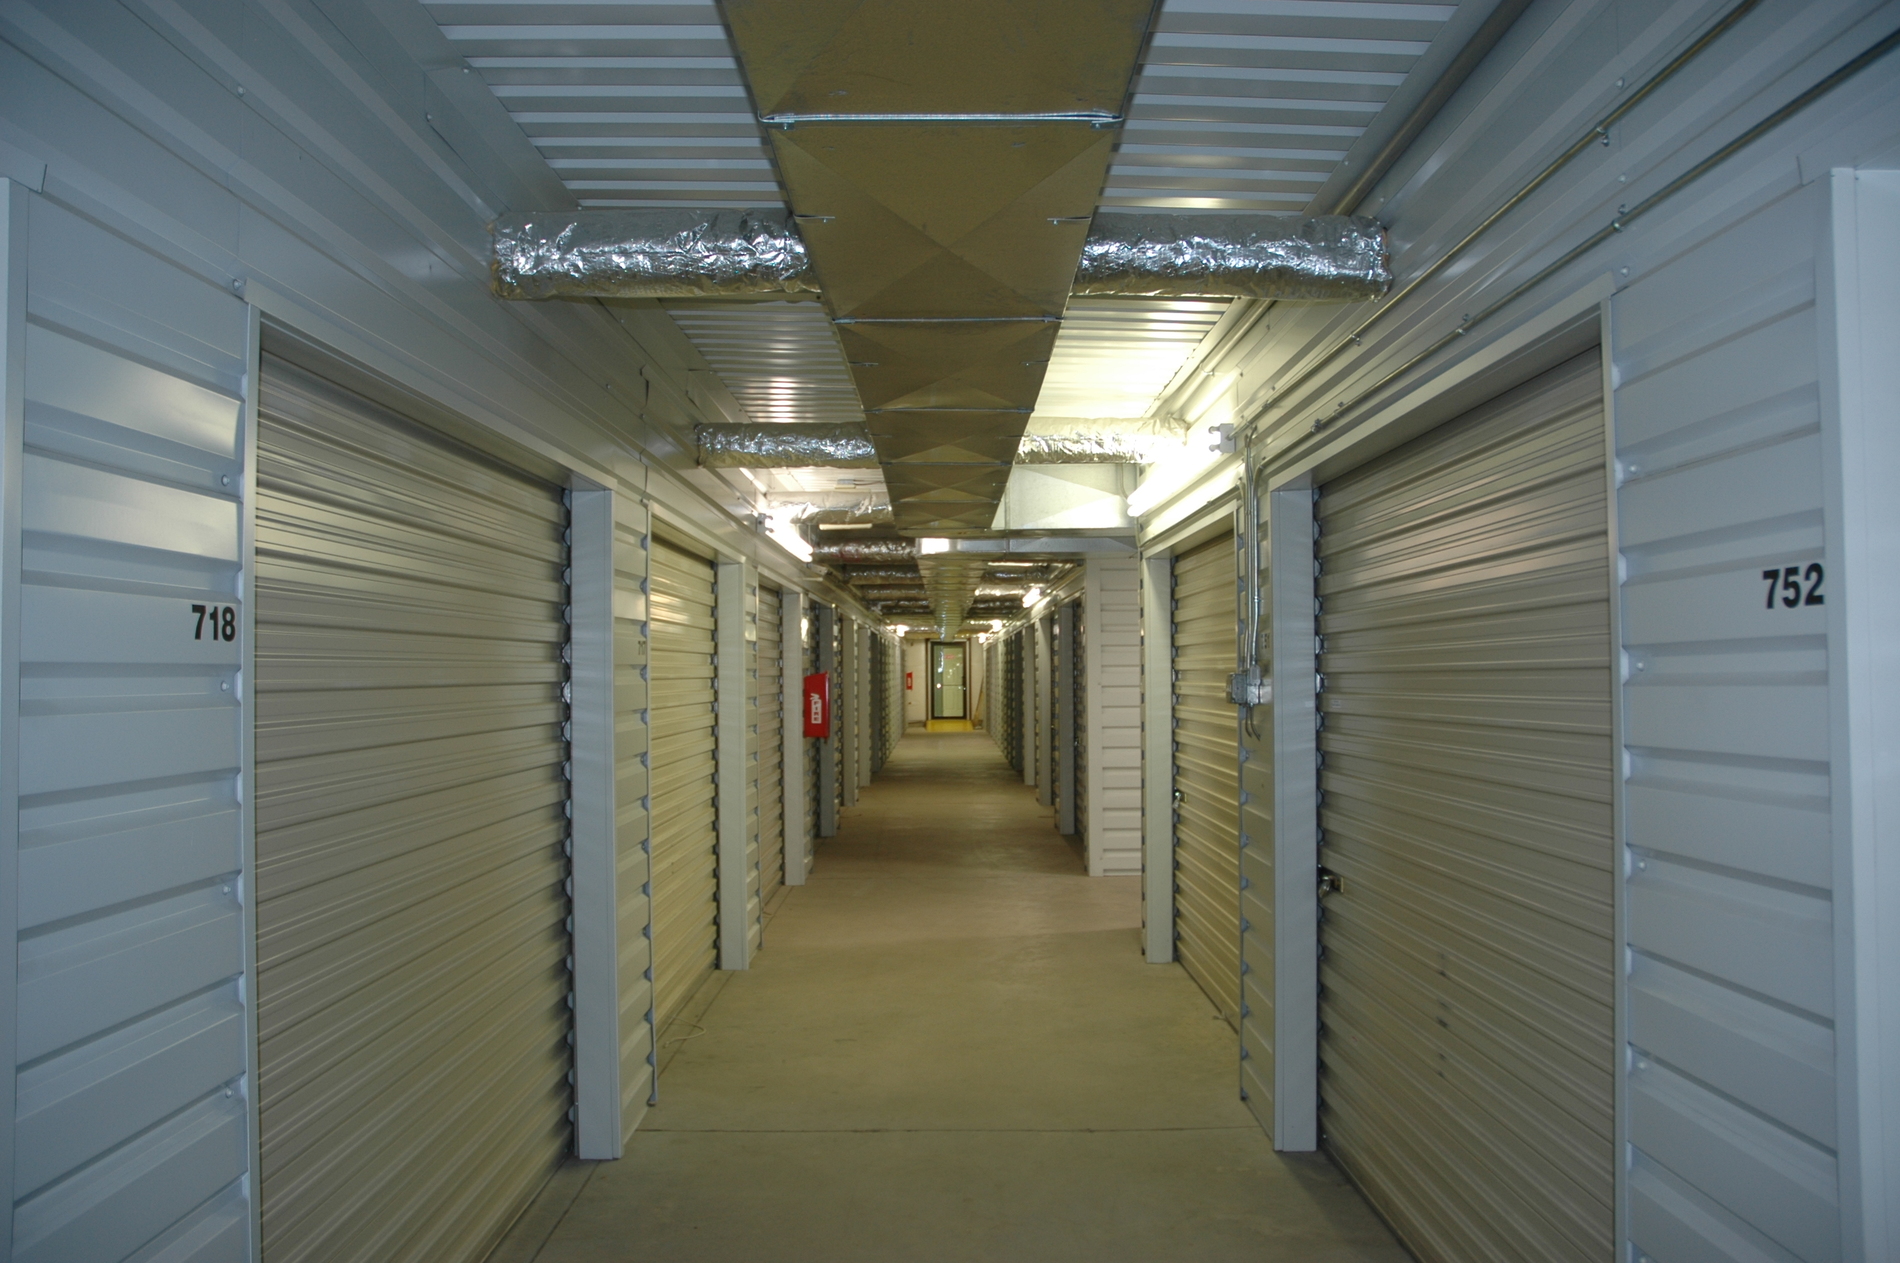 Climate controlled internal units with large well-lit corridors